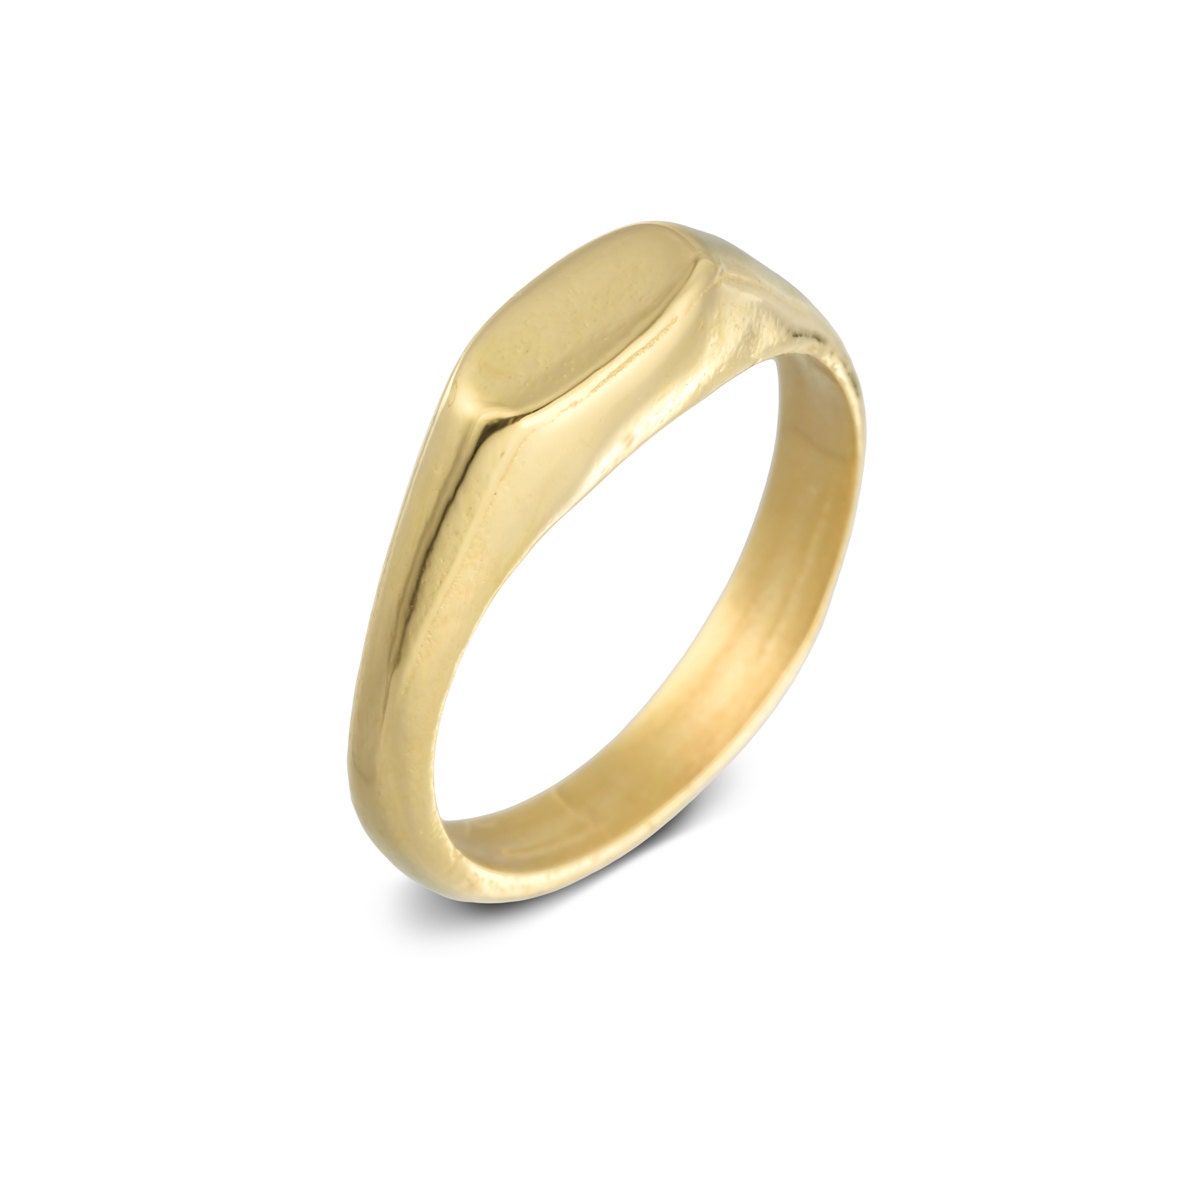 Gold signet ring Pinky signet ring Tiny oval signet ring